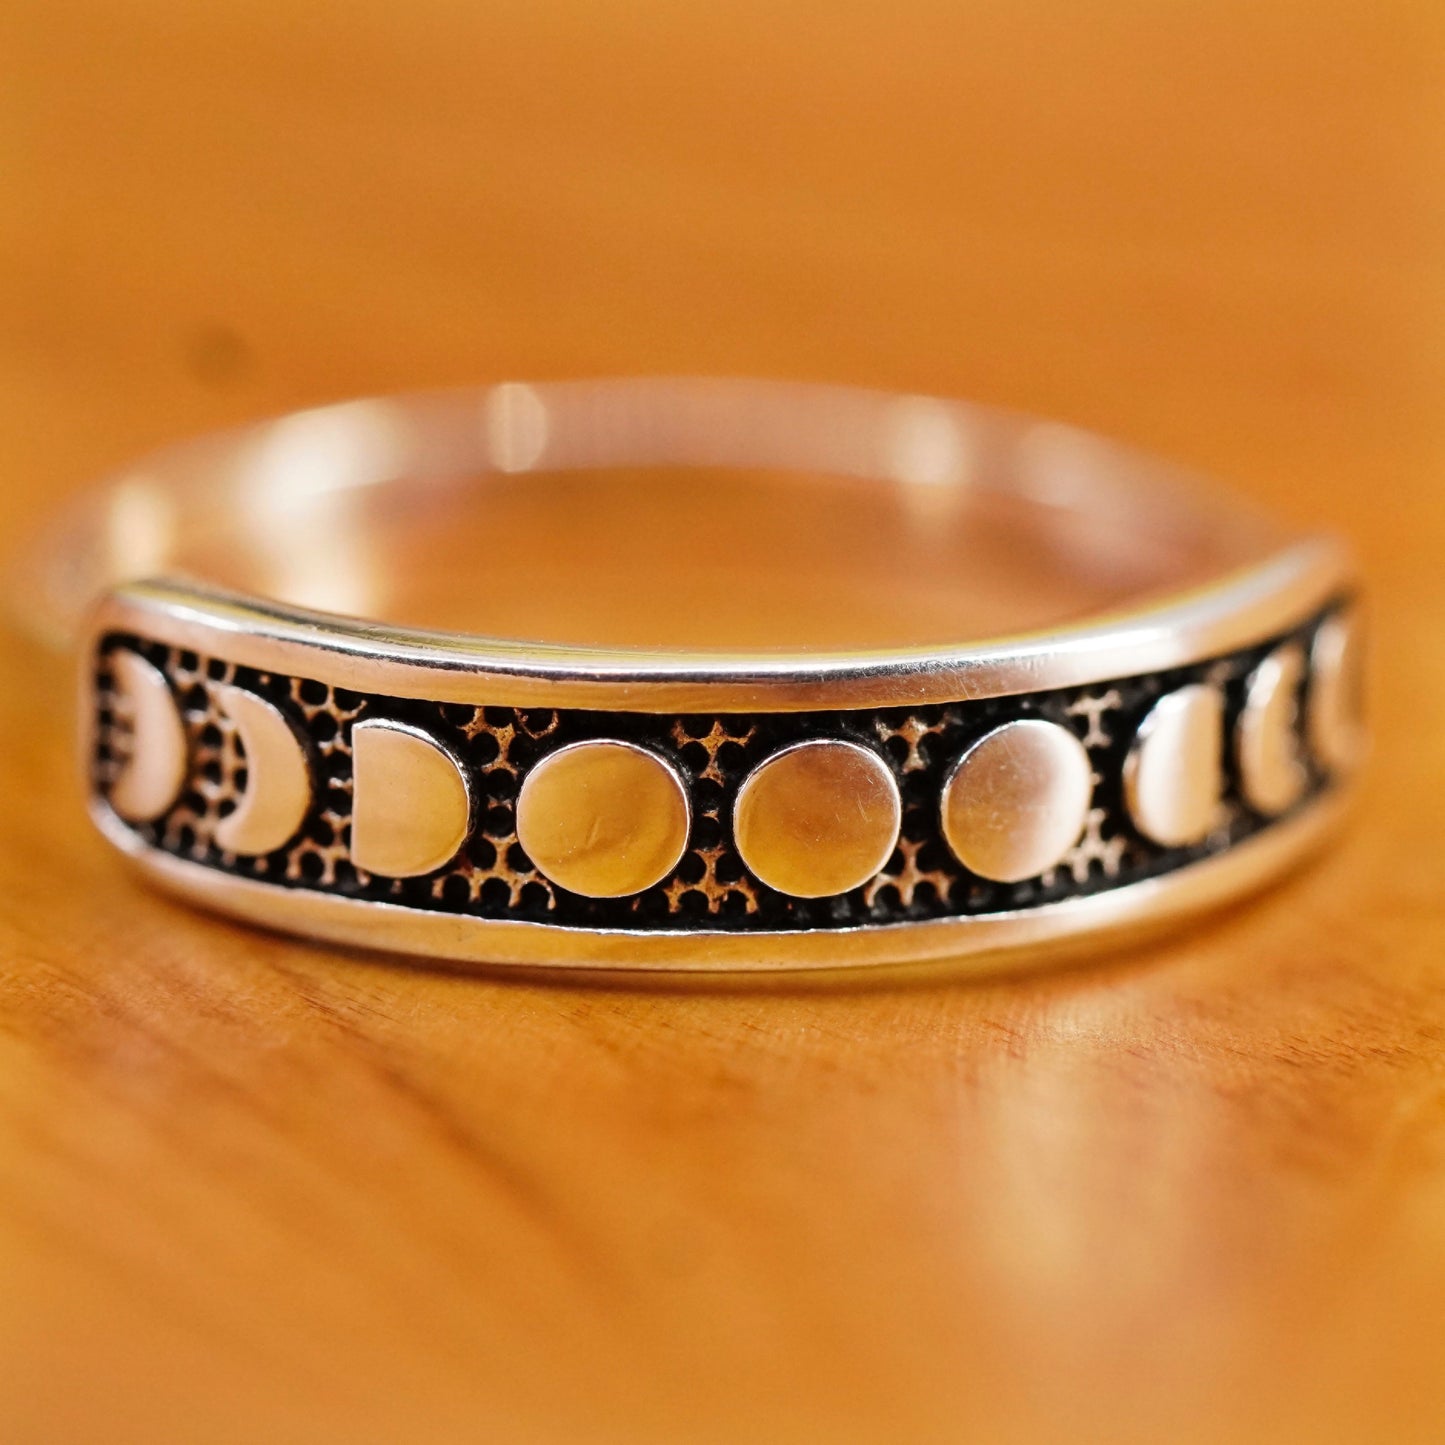 size 10, Sterling silver handmade ring, 925 stackable band with moon phases